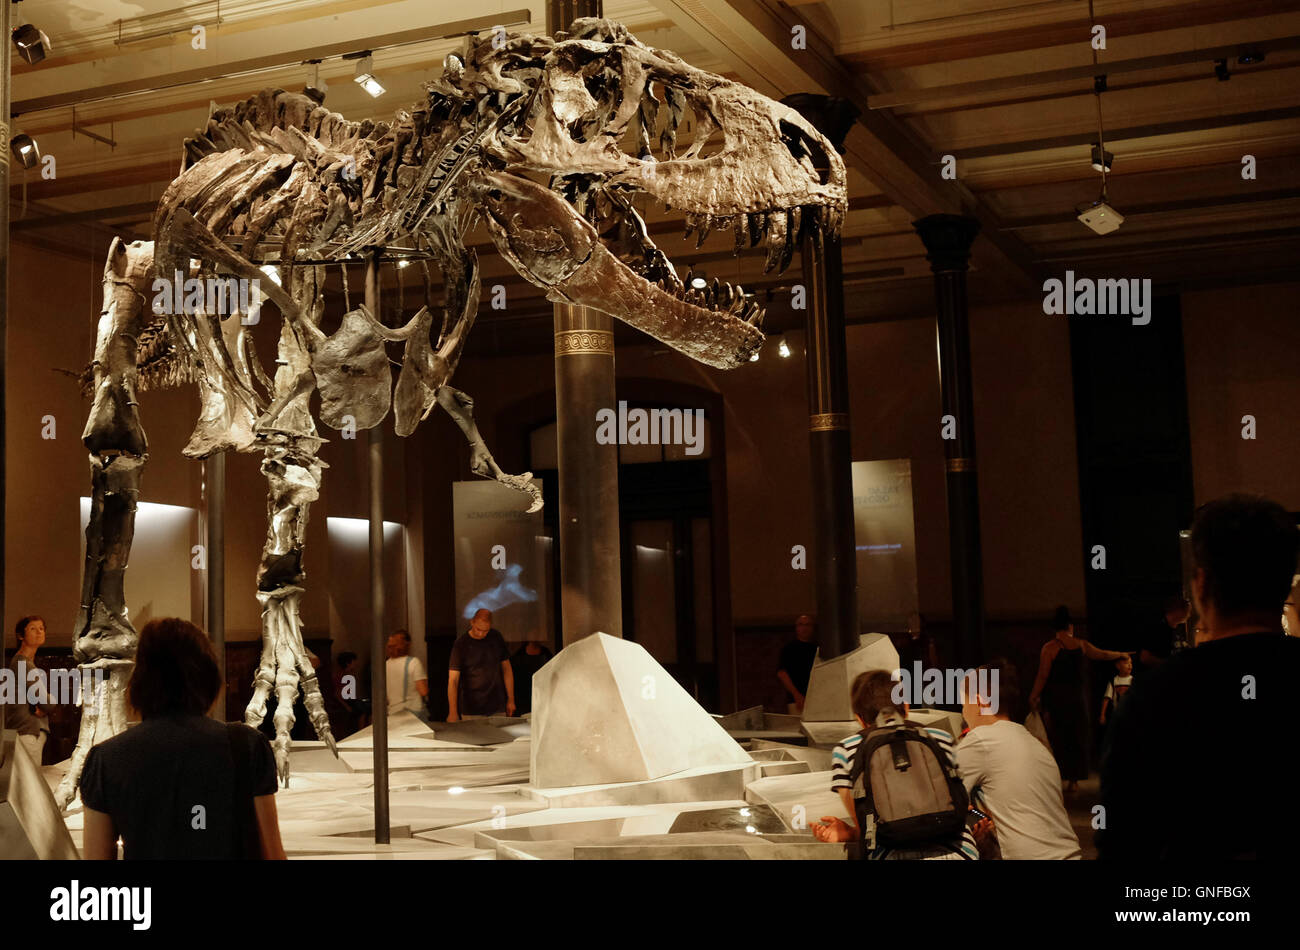 Berlin, Germany. 21st Aug, 2016. Visitors look at the skeleton of the Tyrannosaurus Rex named 'Tristan Otto' at the Museum of Natural History in Berlin, Germany, 21 August 2016. At a height of four meters and a length of twelve meters, it dominates the exhibition 'Tristian - Berlin bares teeth' about the predatory dinosaur Tyrannosaurus rex, which showcases scientific knowledge. The skeleton was found in 2012 in Montana in the USA and is considered a globally unparalleled find. Photo: Jens Kalaene/dpa/Alamy Live News Stock Photo